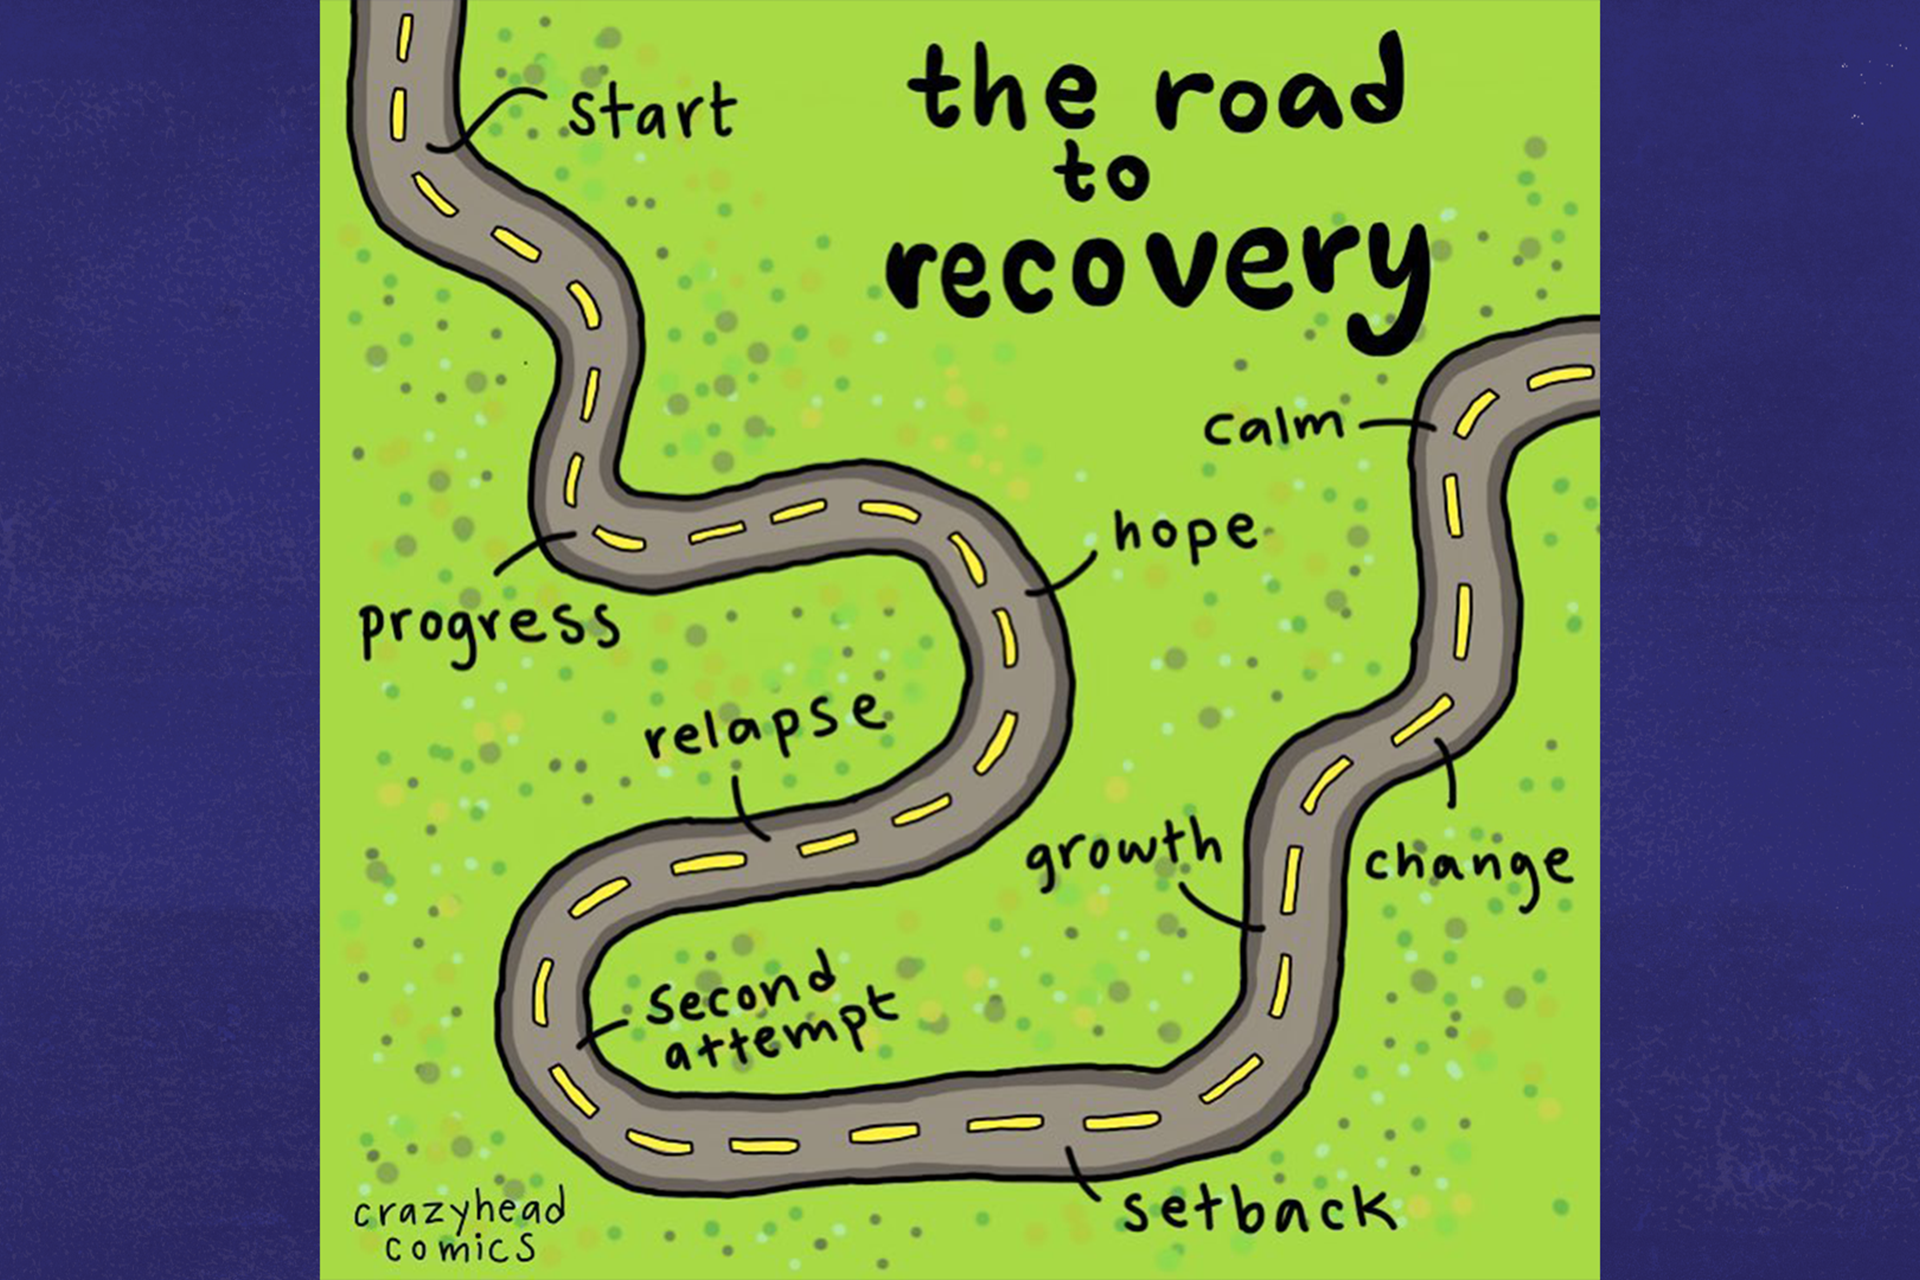 An image of a bendy road titled 'the road to recovery'. Text along the road reads: 'start', 'progress', 'hope', 'relapse', 'second attempt', 'setback', 'growth', 'change', 'calm'.